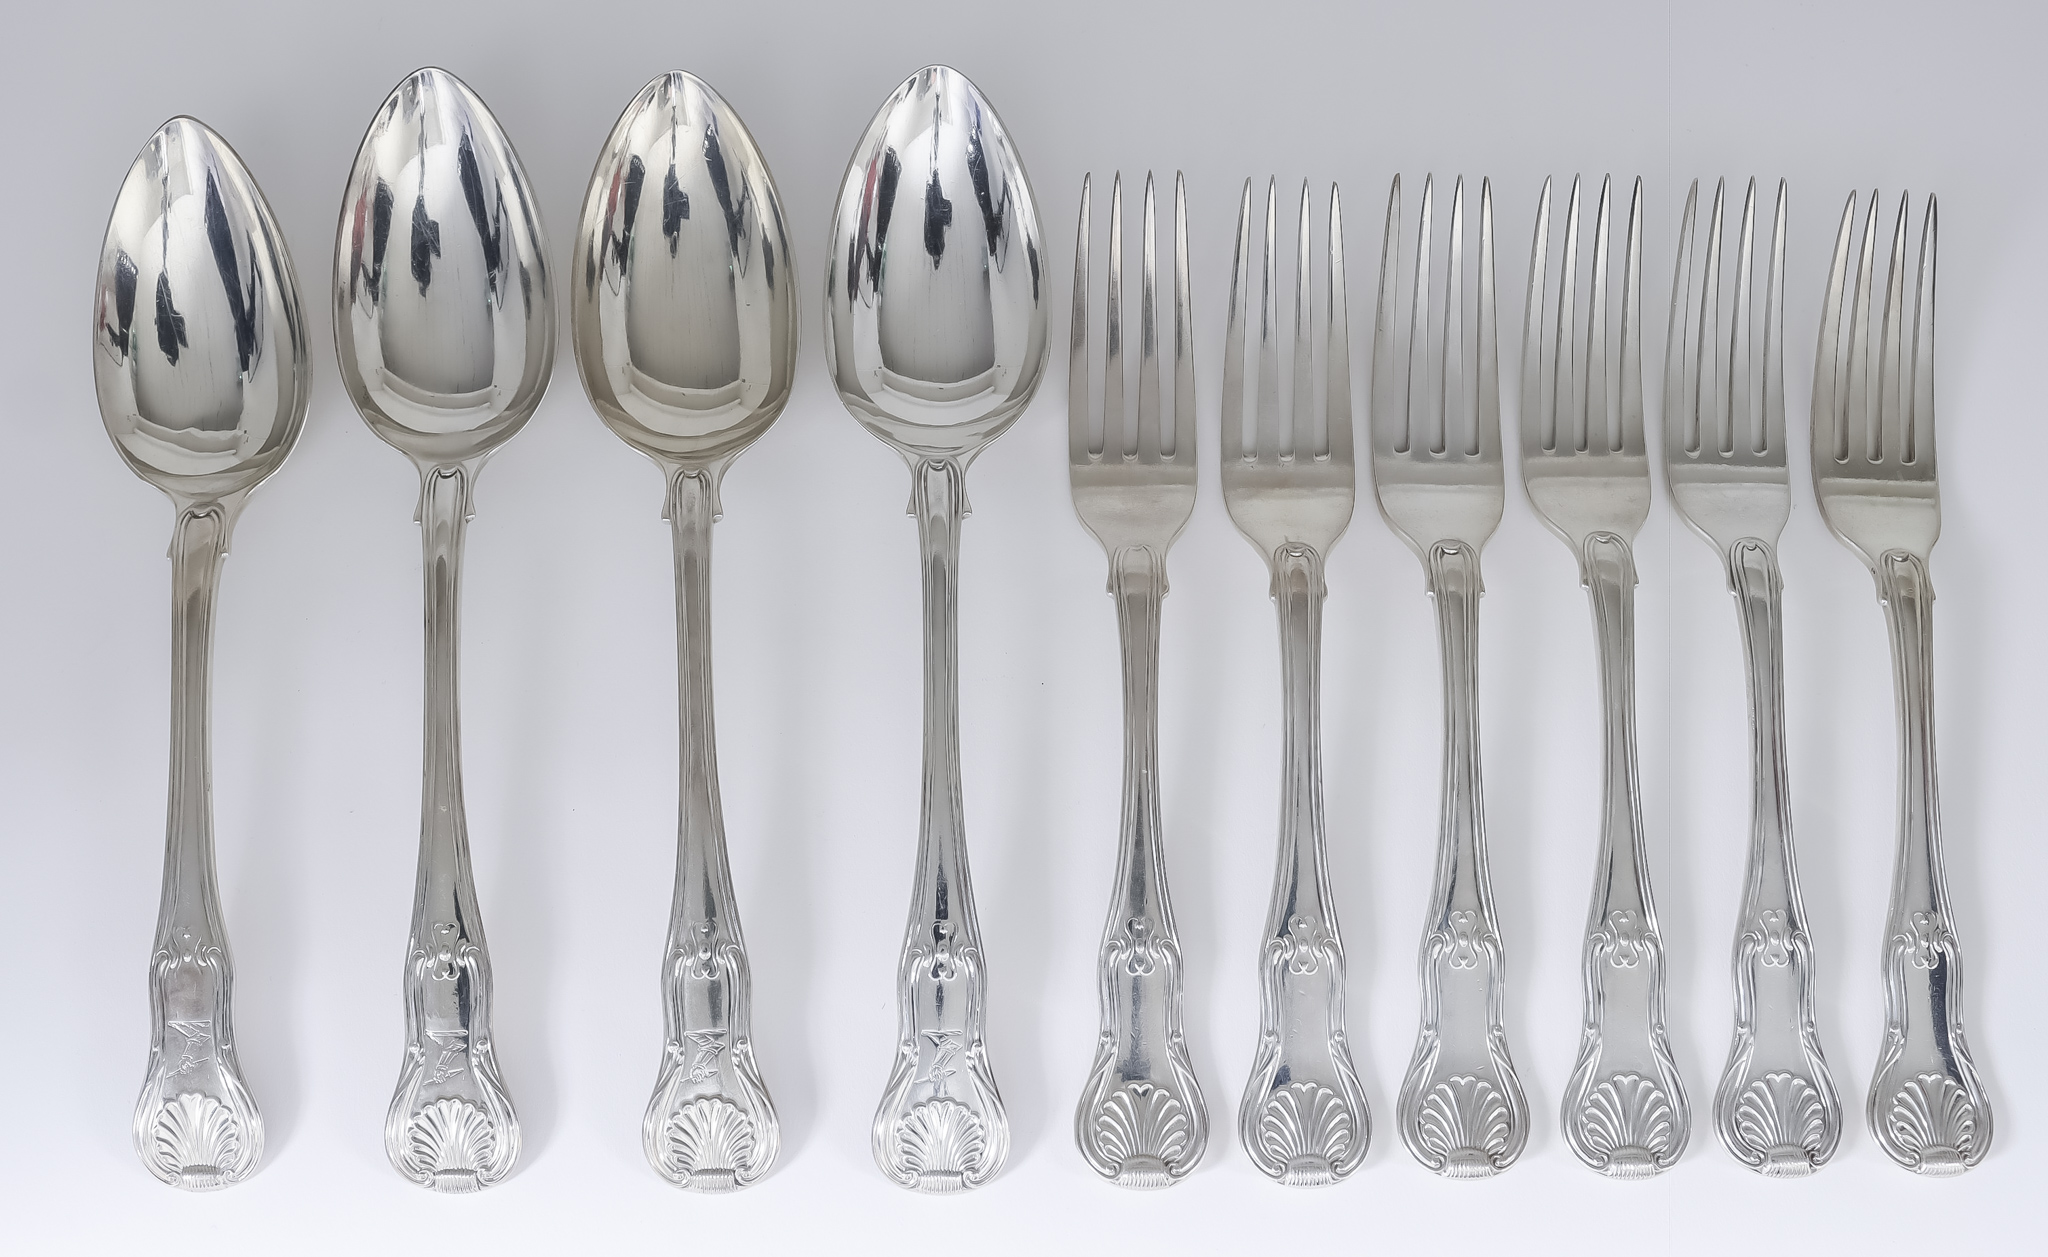 Six George III Silver Queens Pattern Table Forks, a Matching Table Spoon, and Three George IV